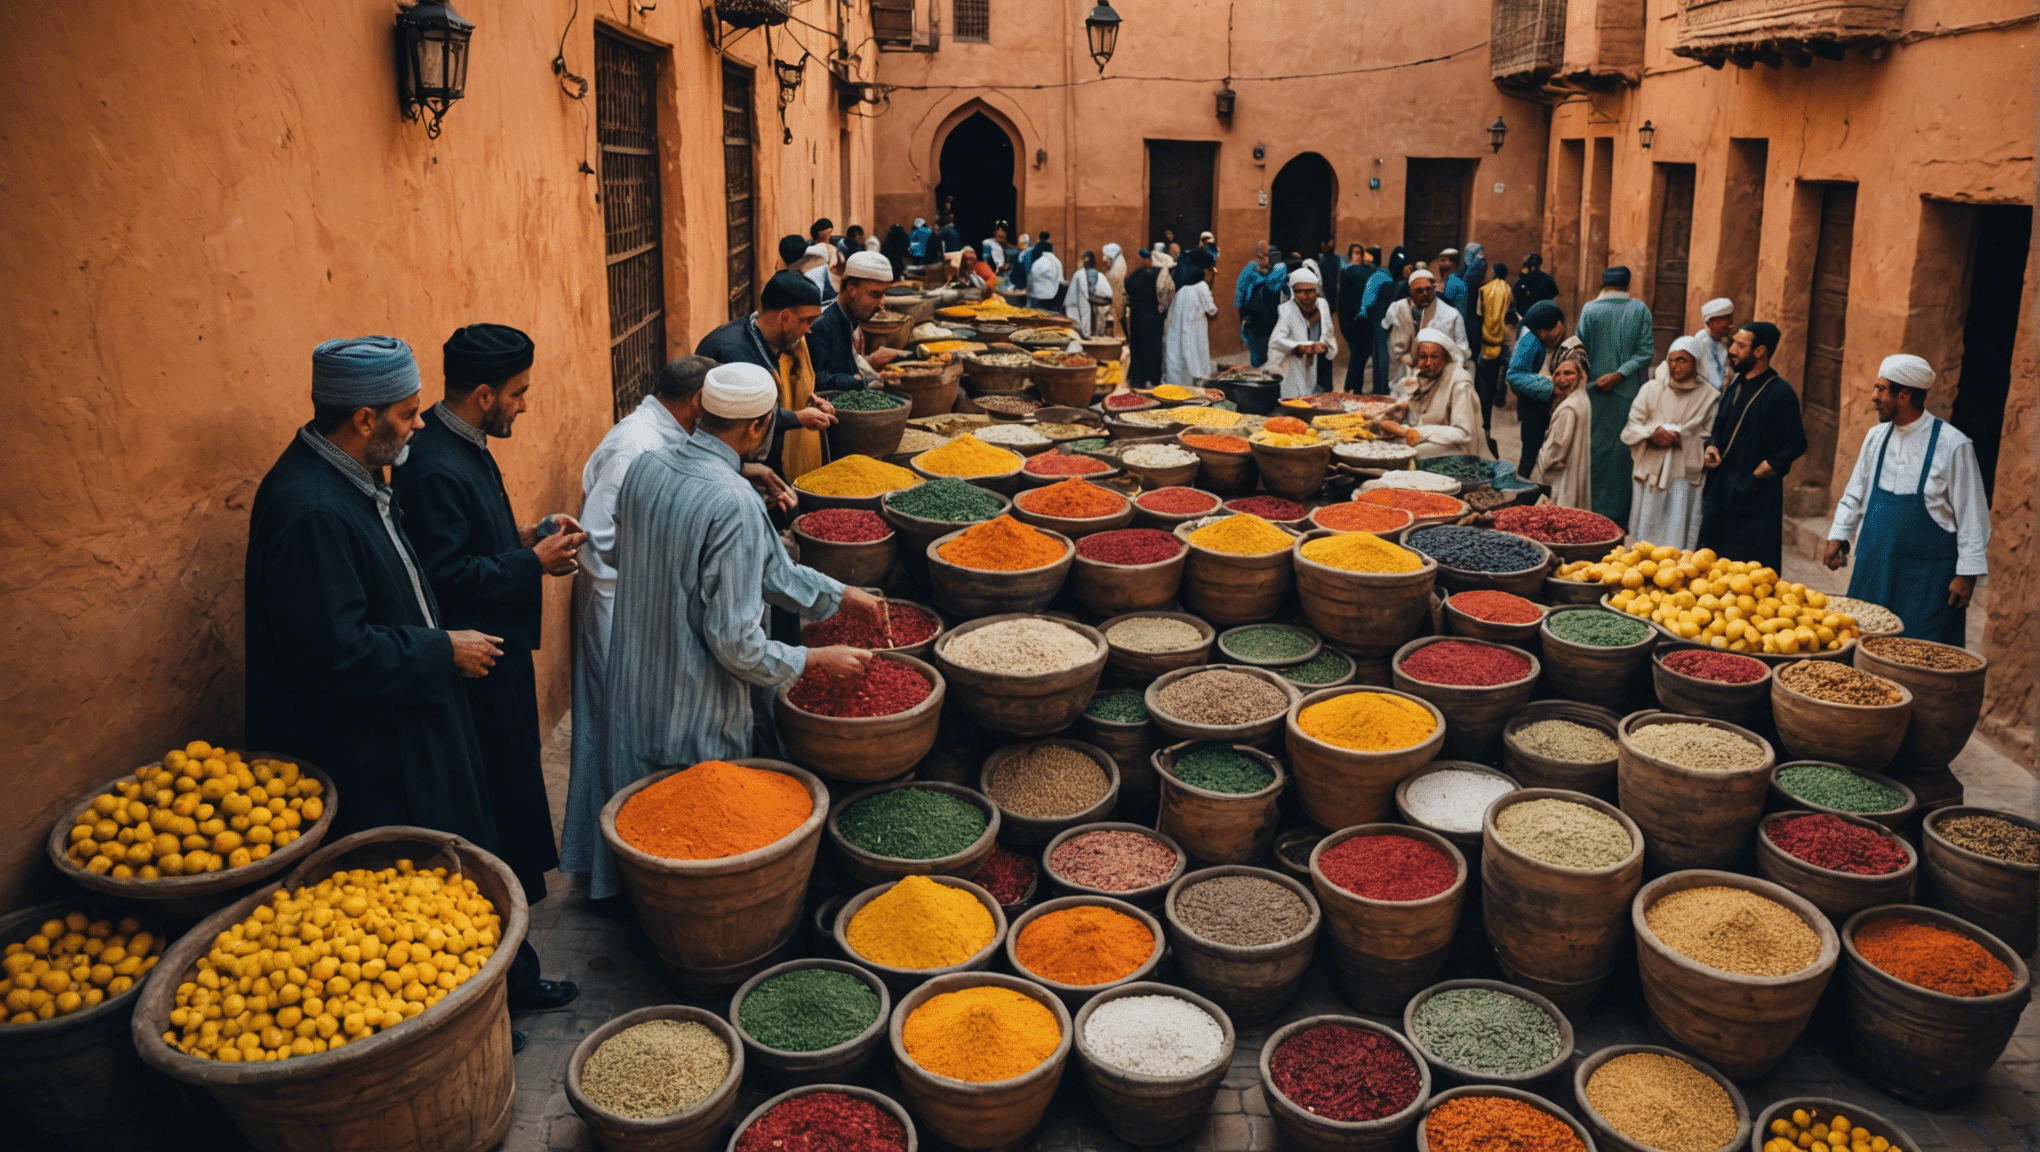 discover the alcohol laws in morocco and what you need to know before enjoying a drink in this north african country.